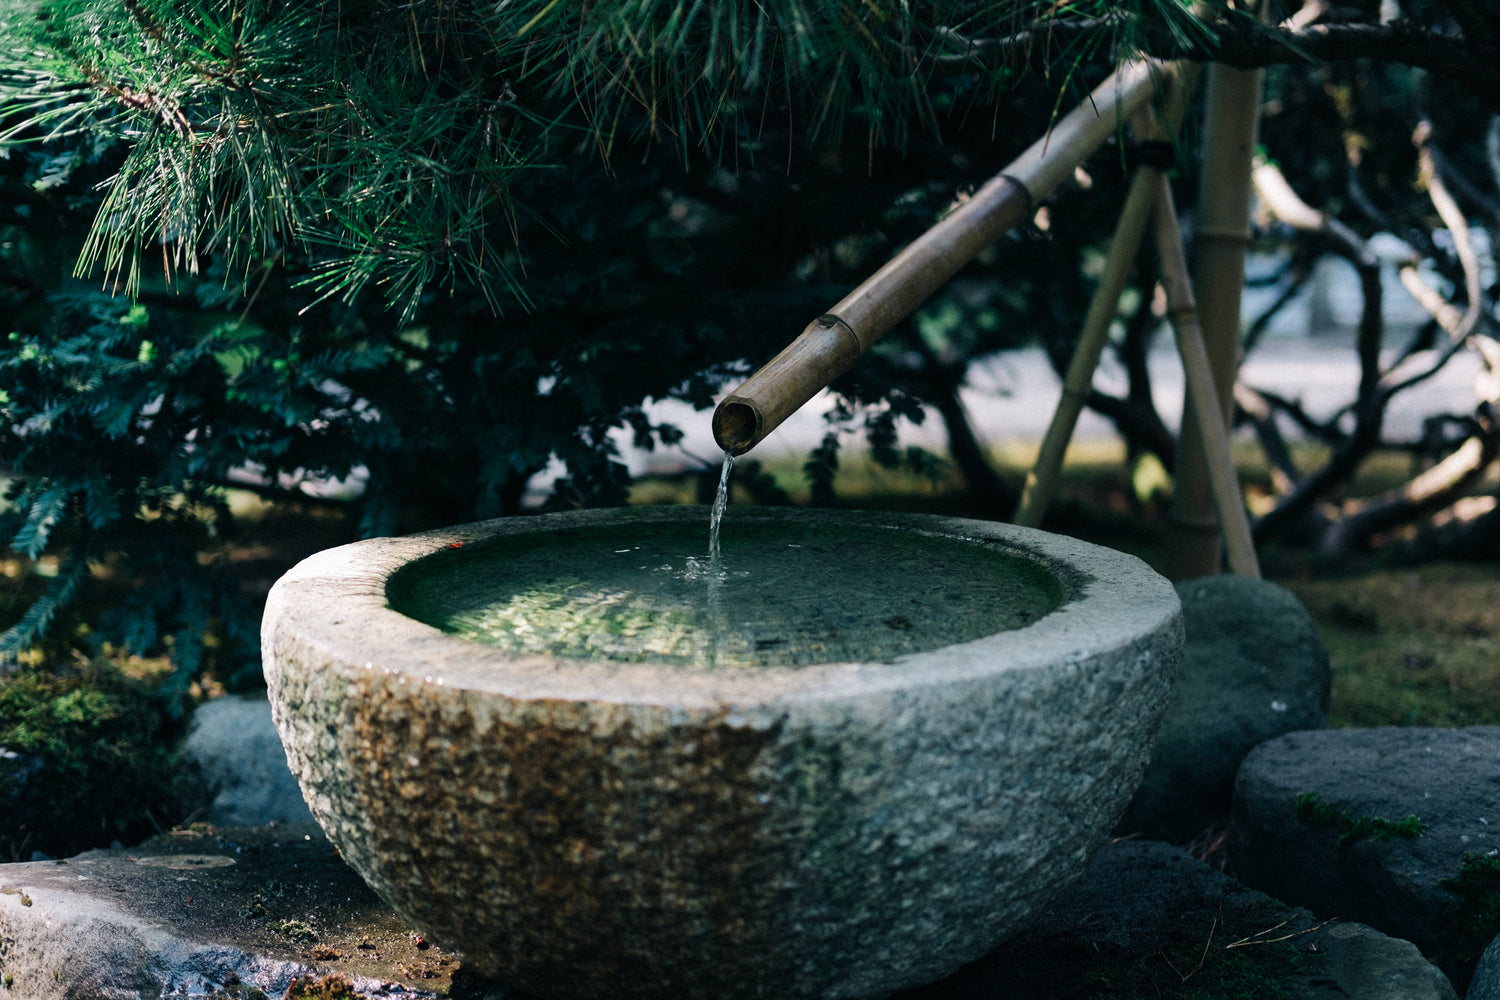 Image of a Bamboo Fountain